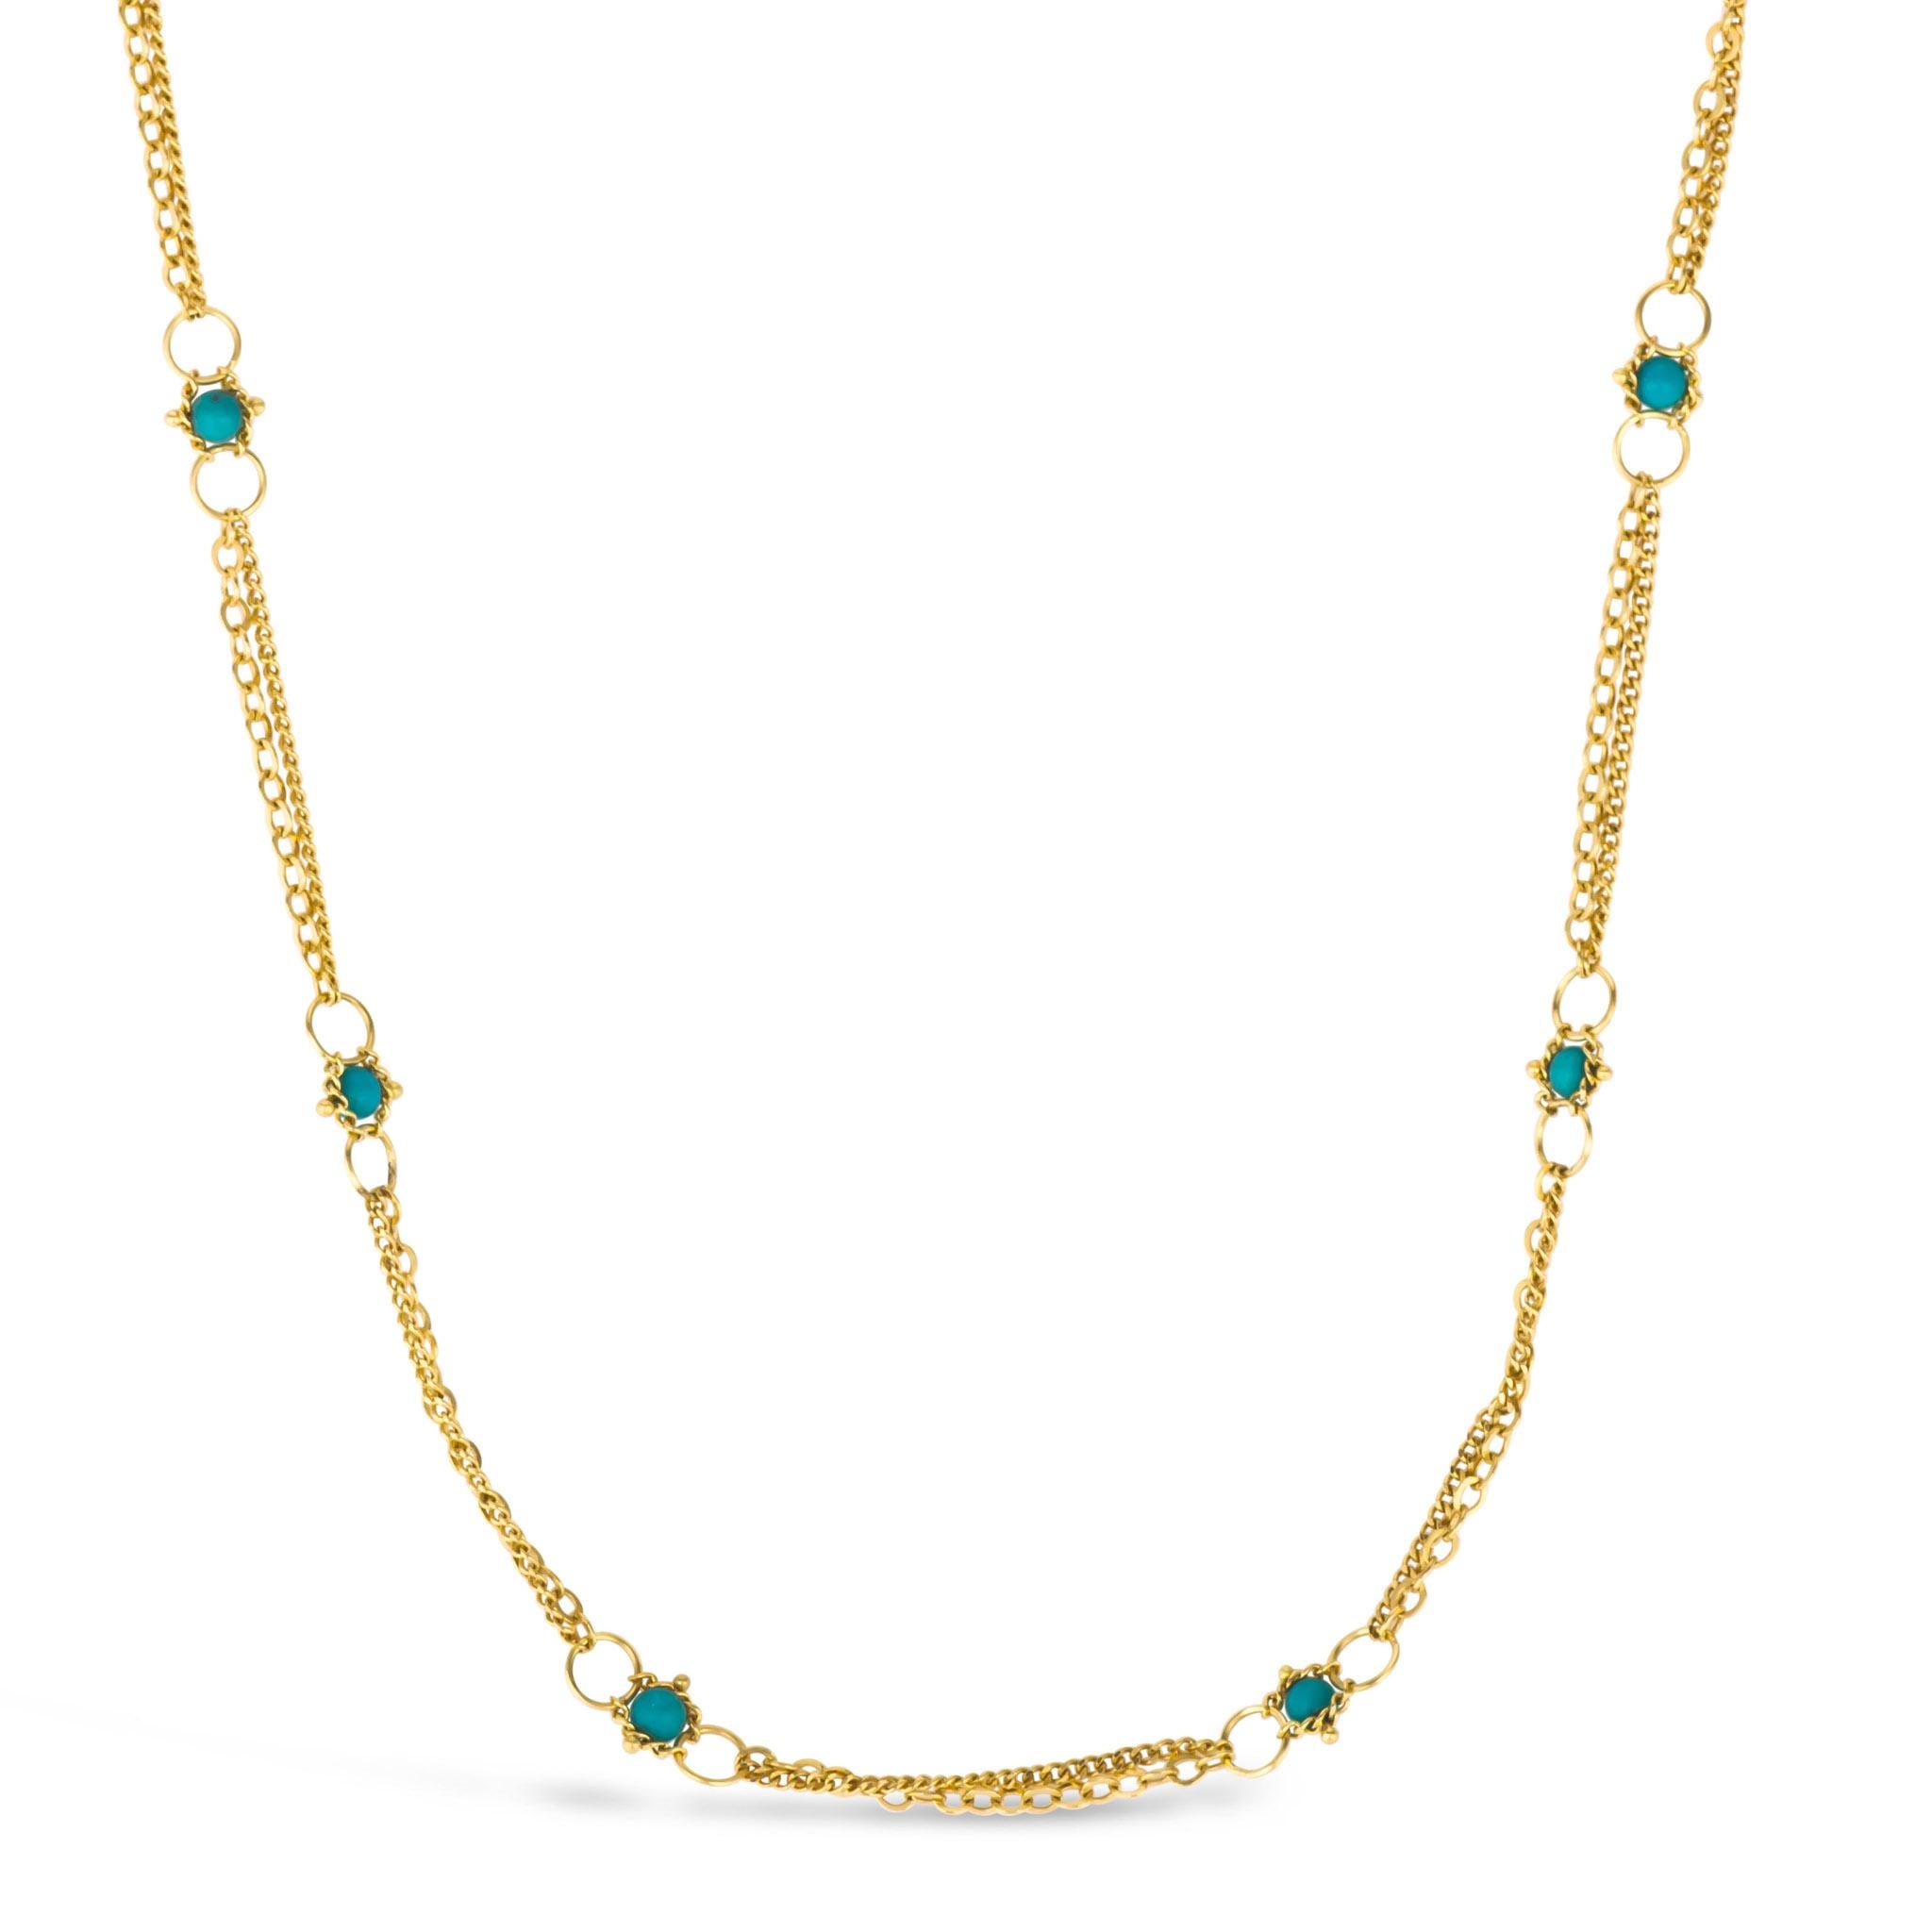 Women's or Men's Whisper Chain Necklace in Turquoise For Sale